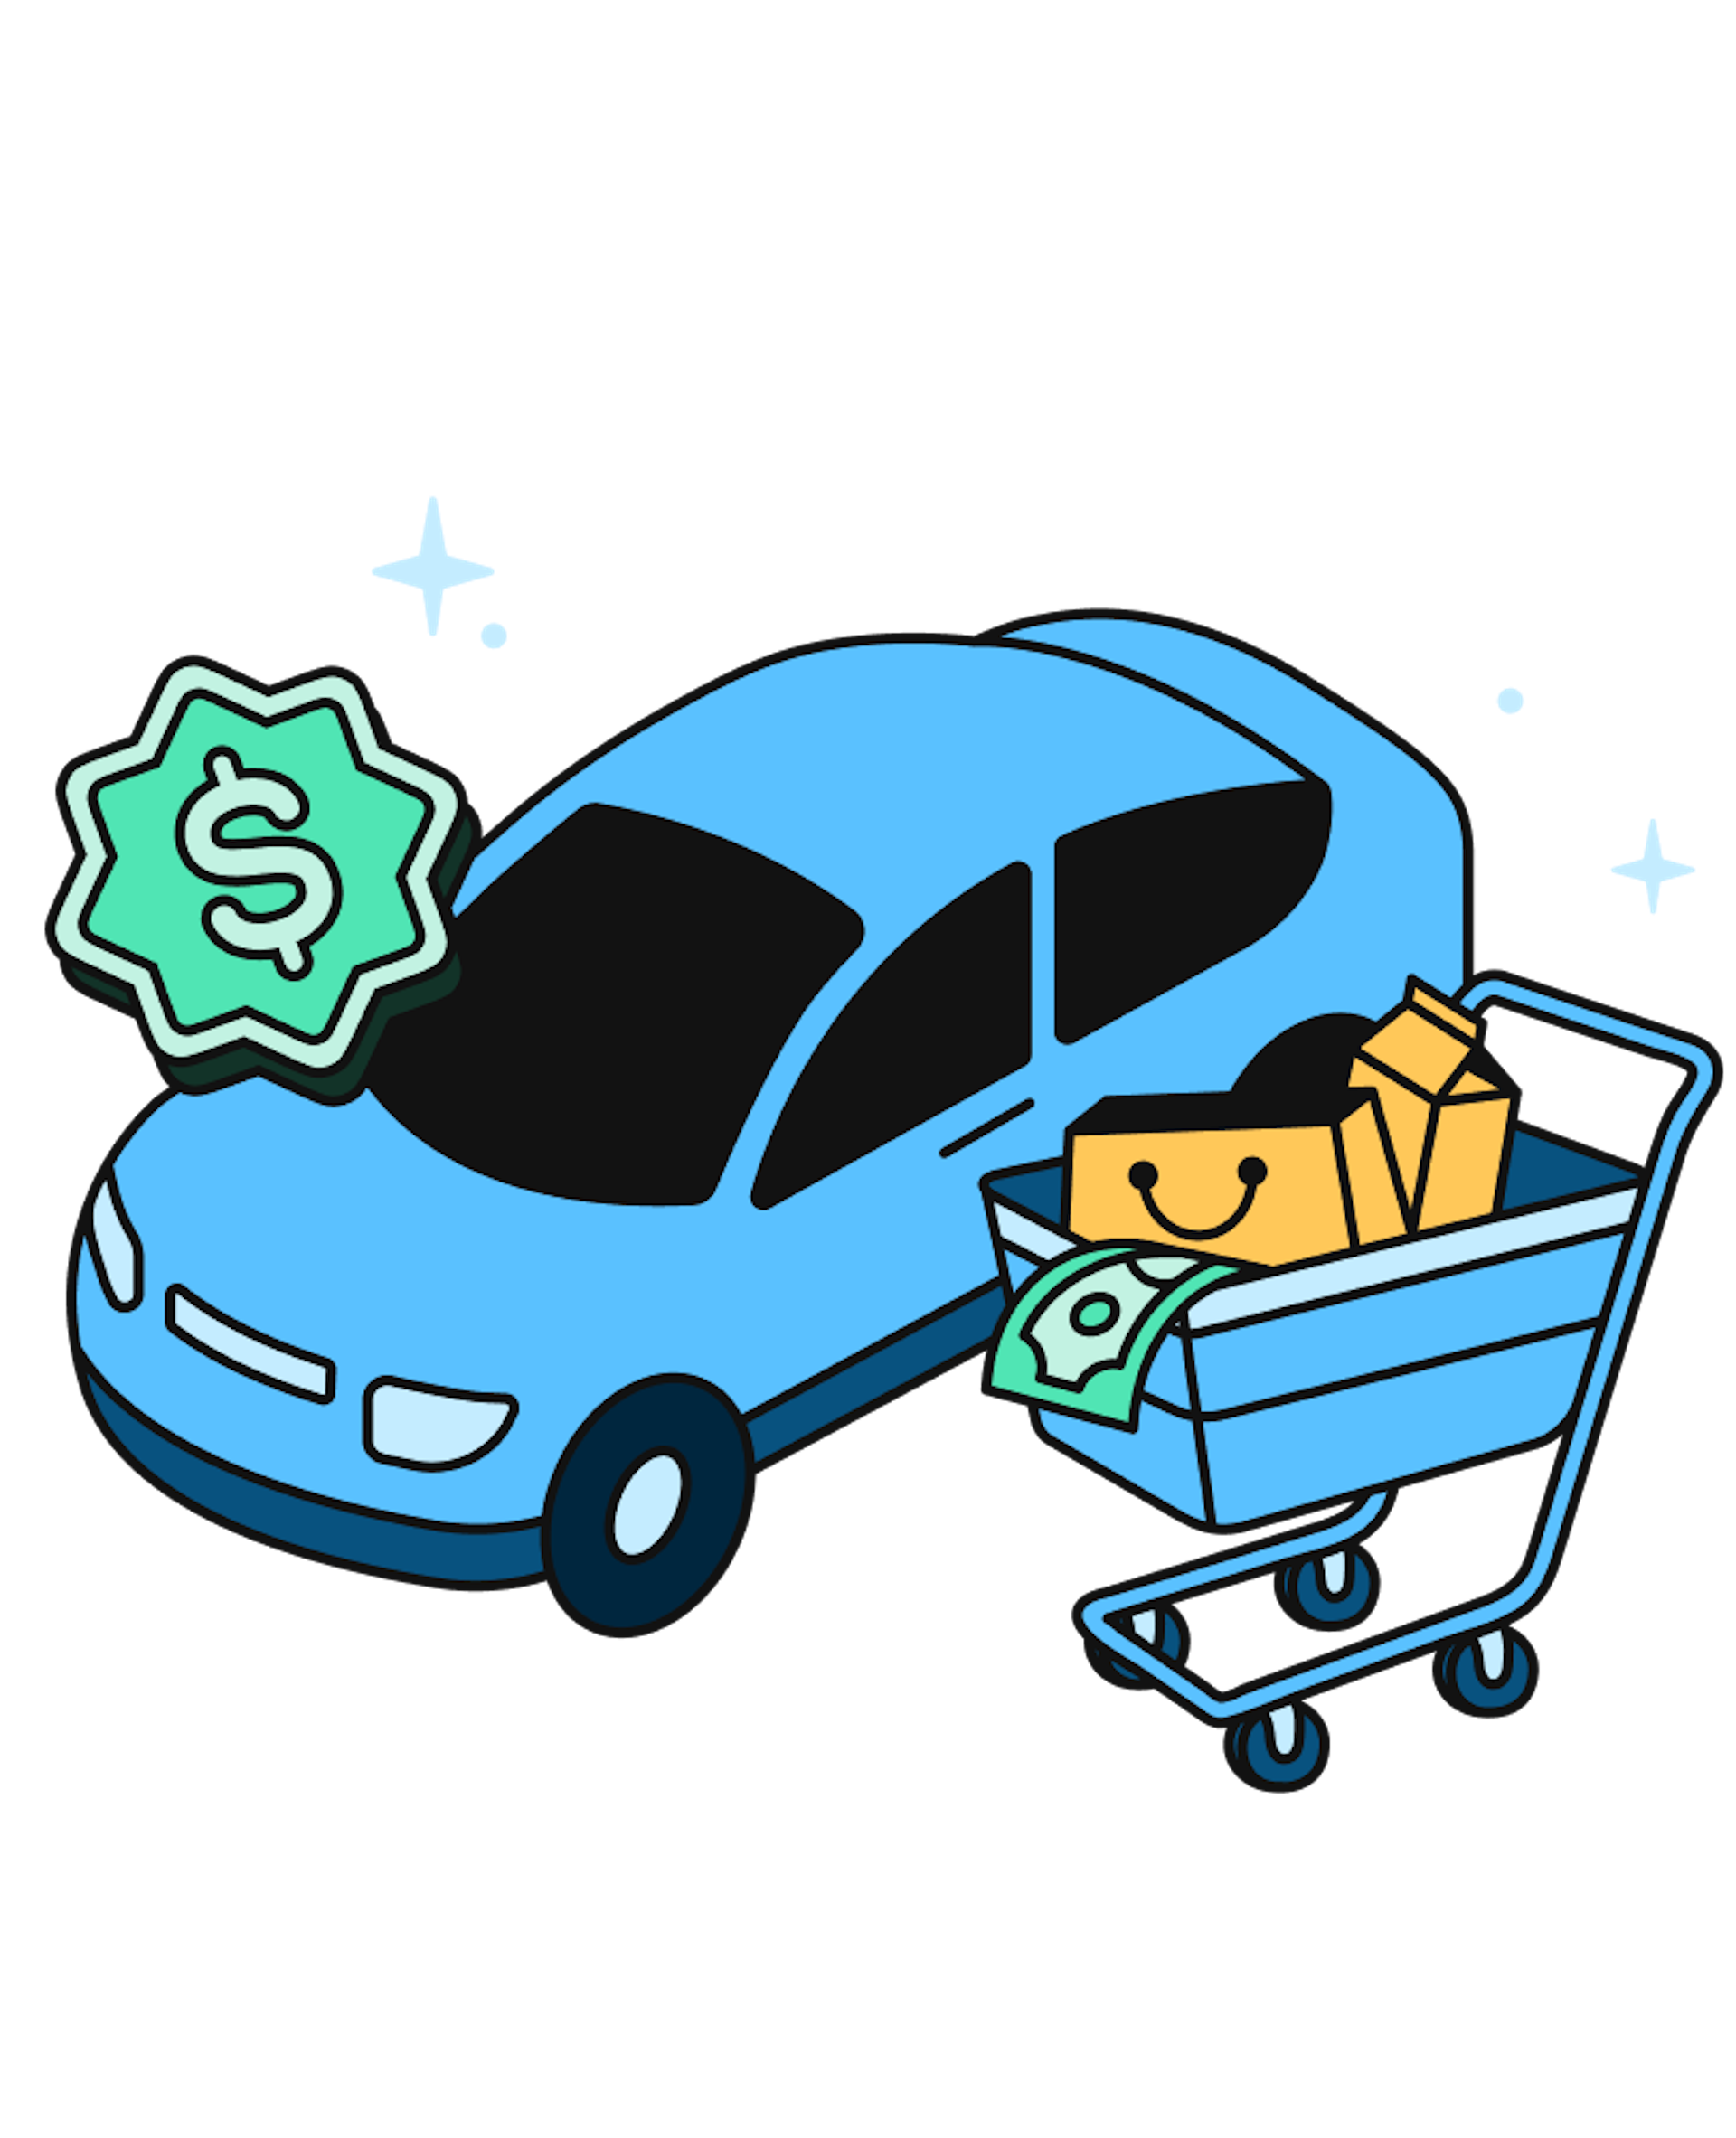 A blue Spark Driver car and shopping cart in motion, with a dollar sign badge to indicate instant payment through One